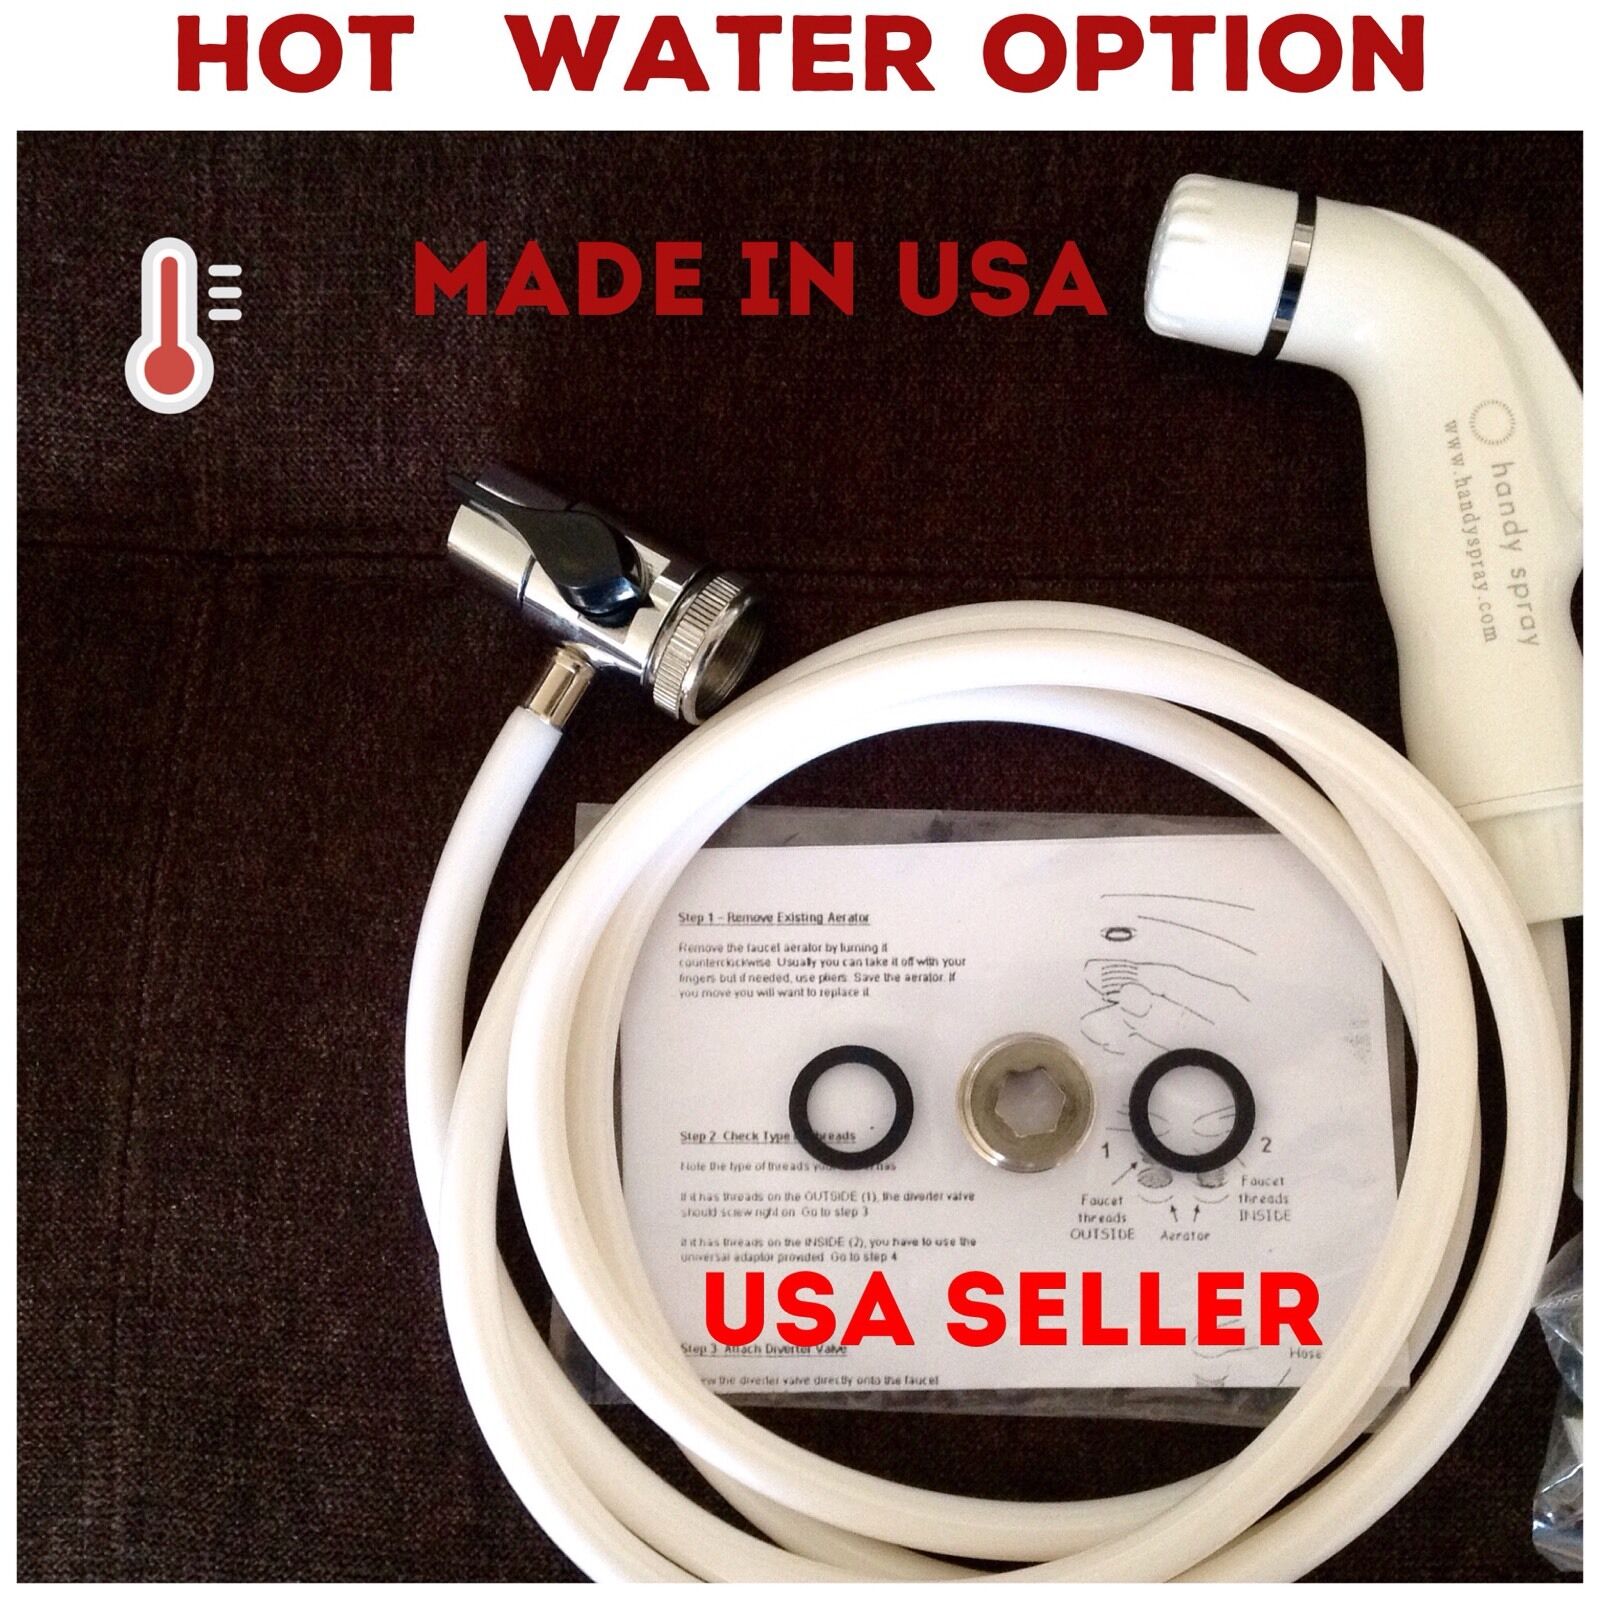 NEW White Toilet Bidet Shattaf Muslim Shower With Hot & Cold Water Options